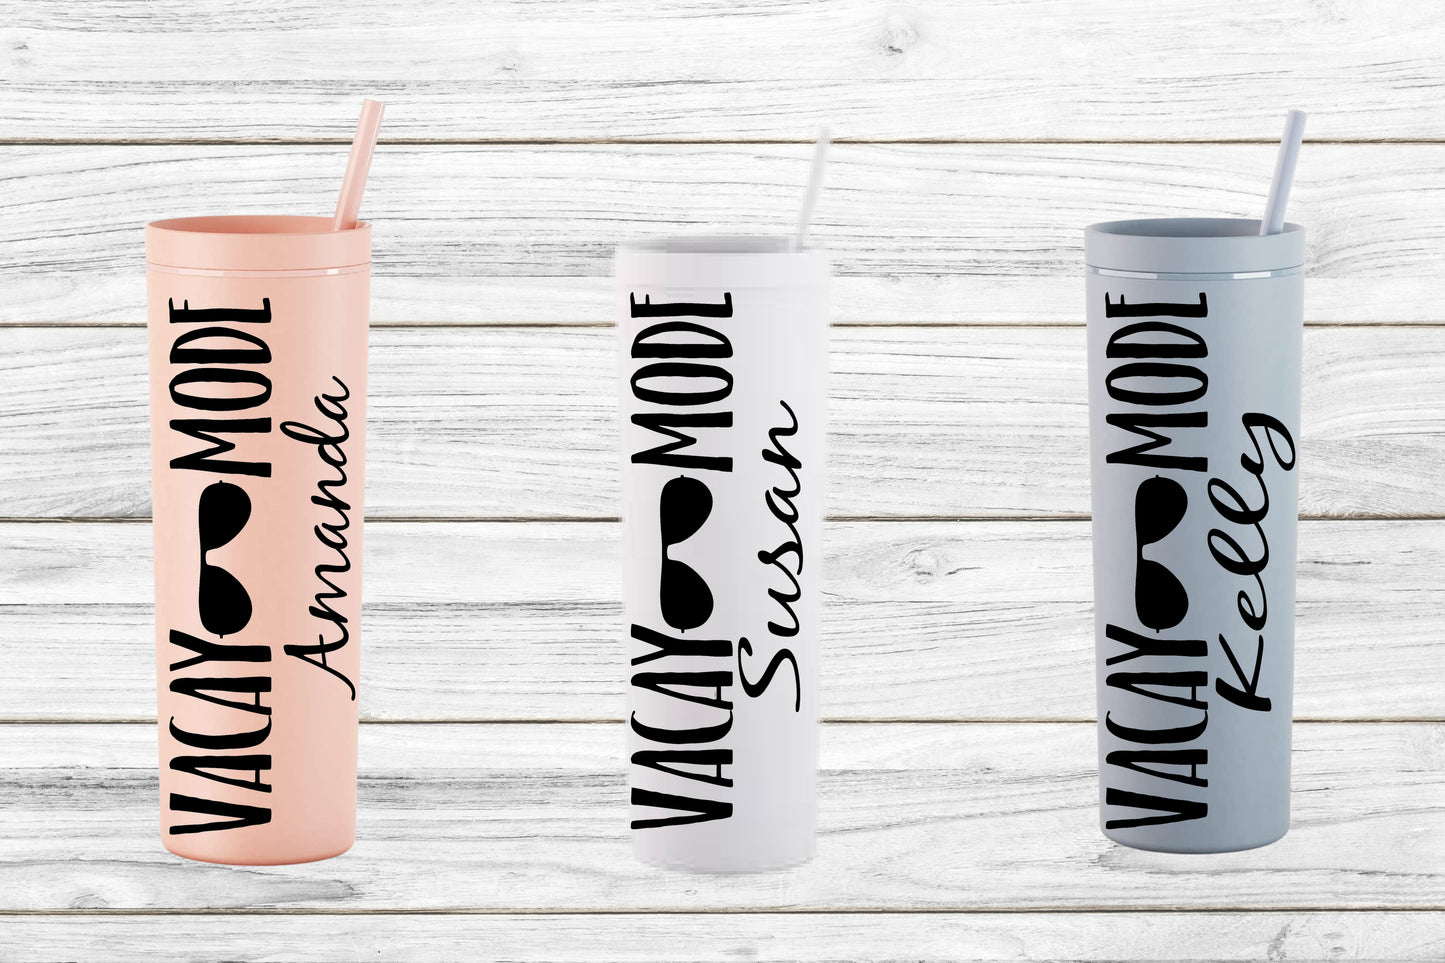 vacation Tumbler, Girls Trip Cups, Personalized Vacay Mode Skinny 18 oz Acrylic Tumblers, Beach Vacation, Bachelorette Cups, Travel Mug